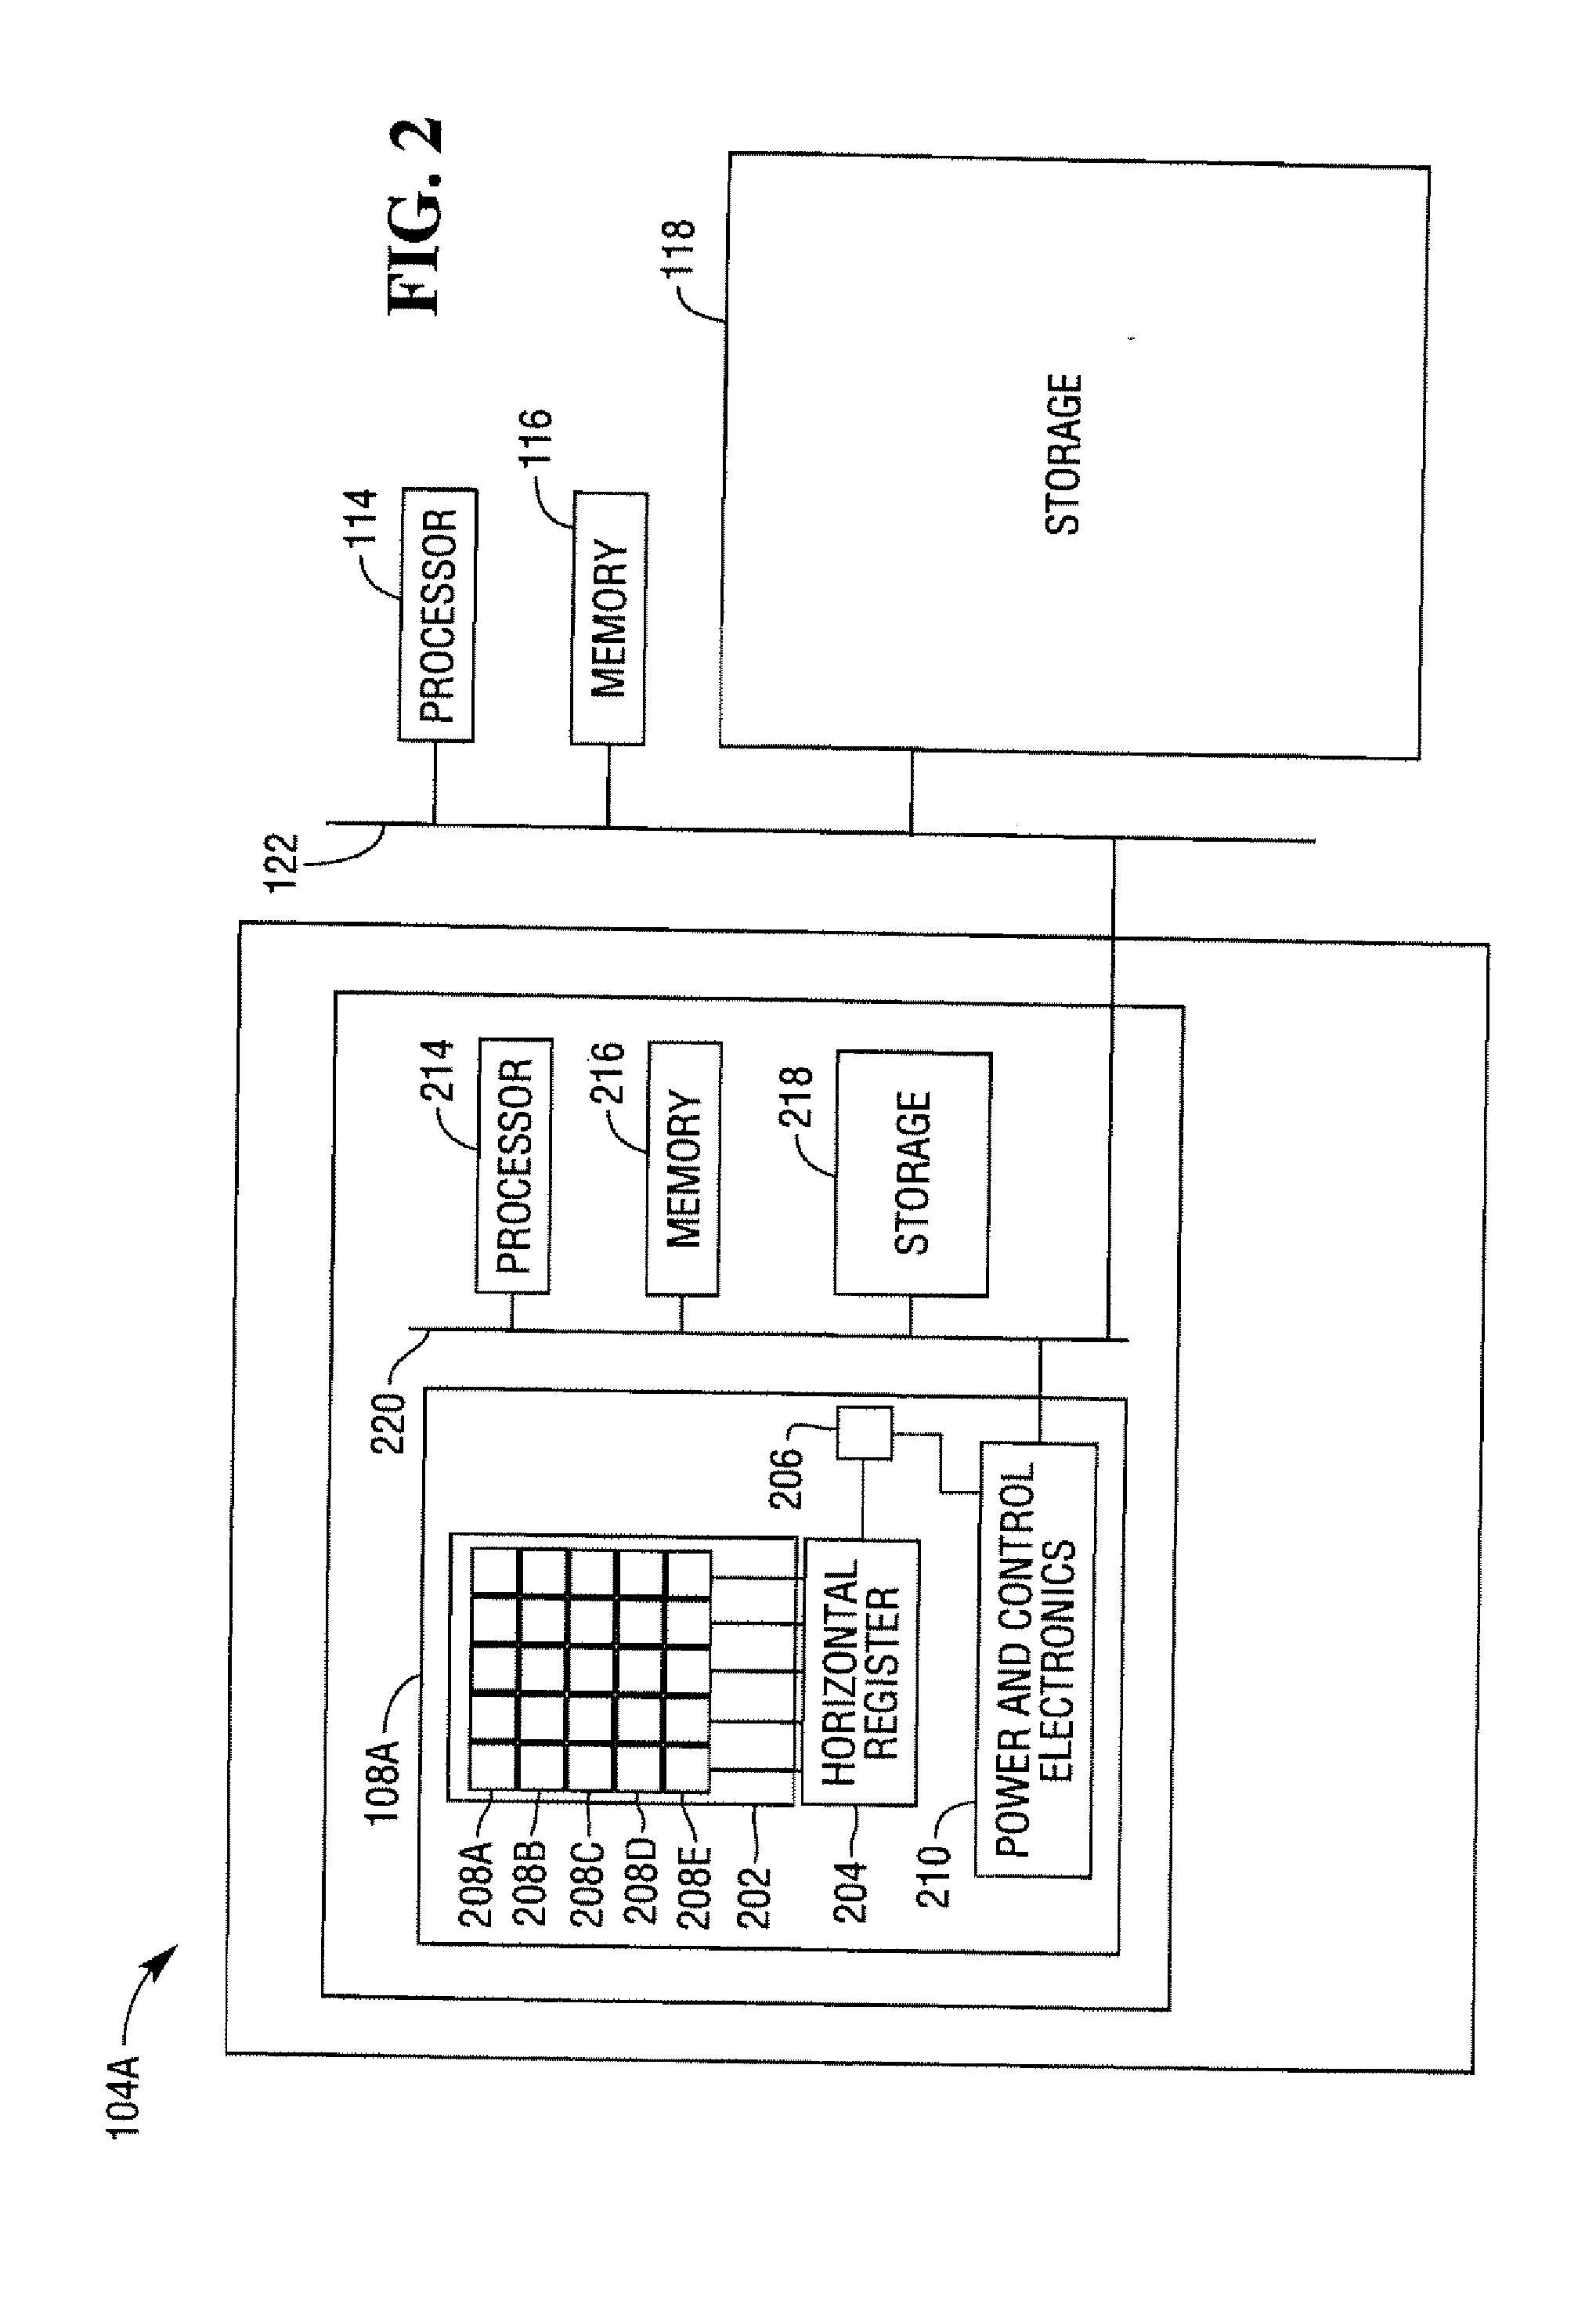 Methods and Apparatus for Imaging Bar Code Scanning